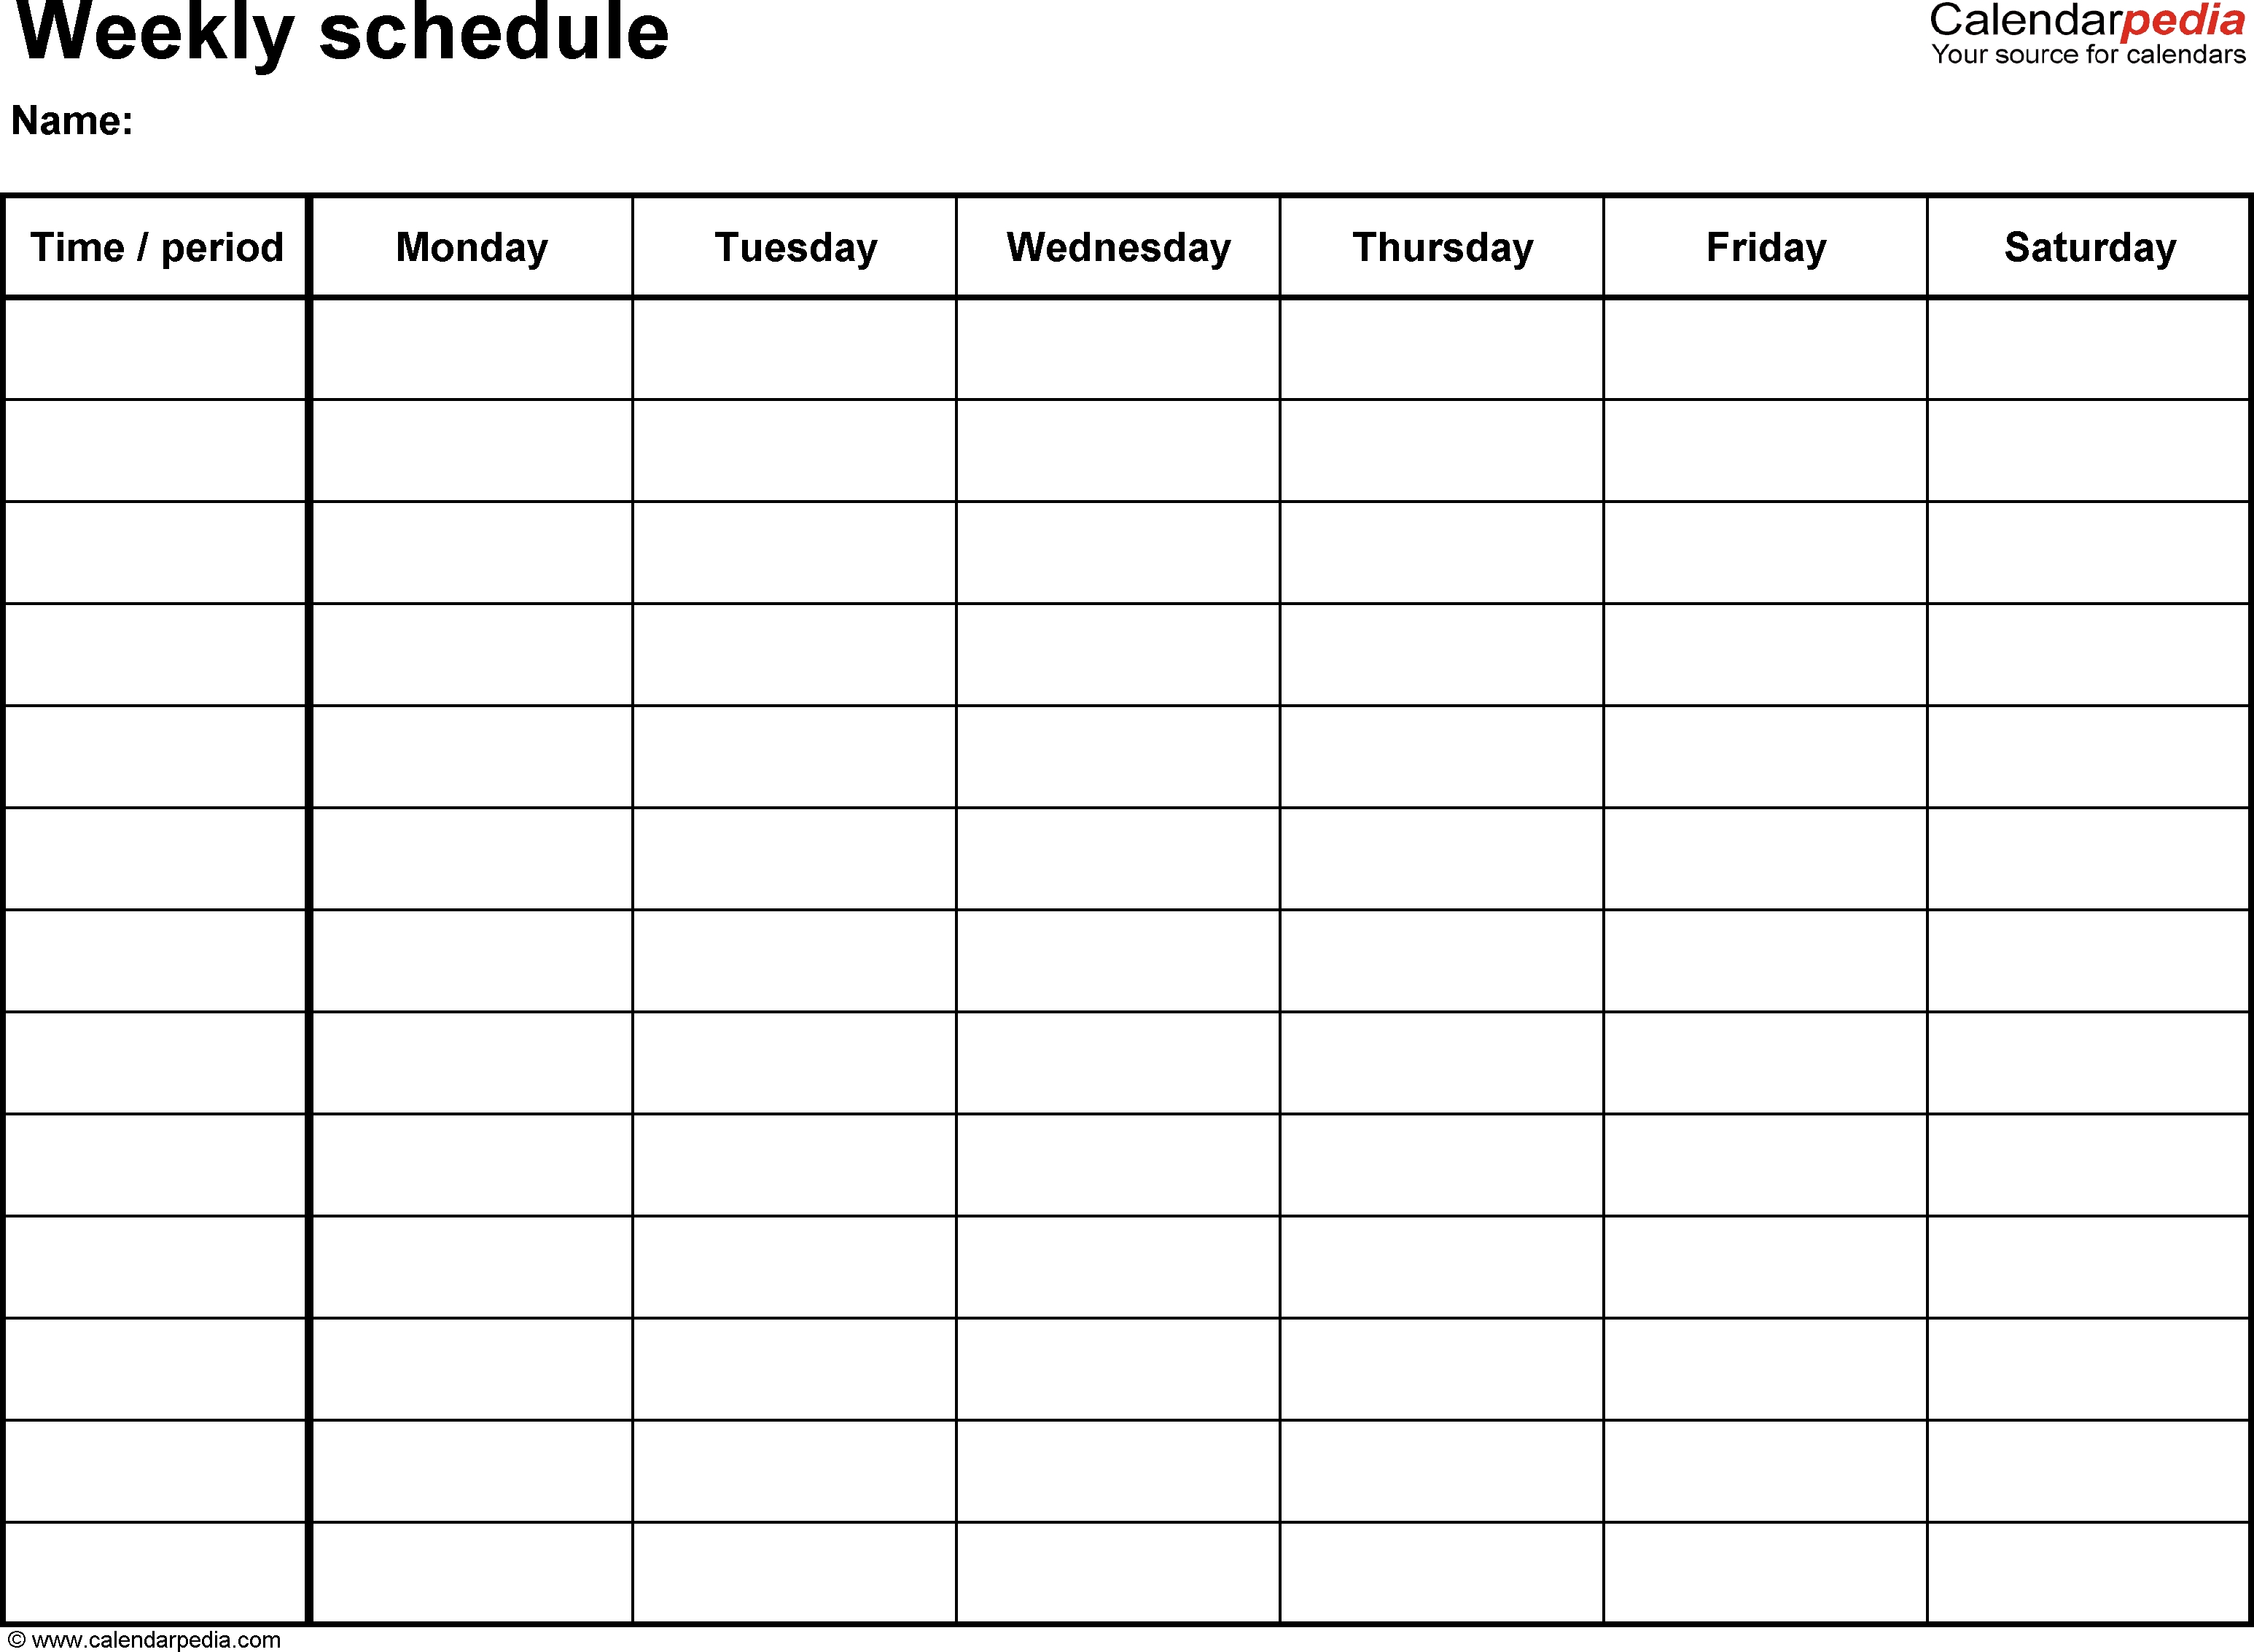 Free Weekly Schedule Templates For Word - 18 Templates  Calendar Monday Through Friday Schedule